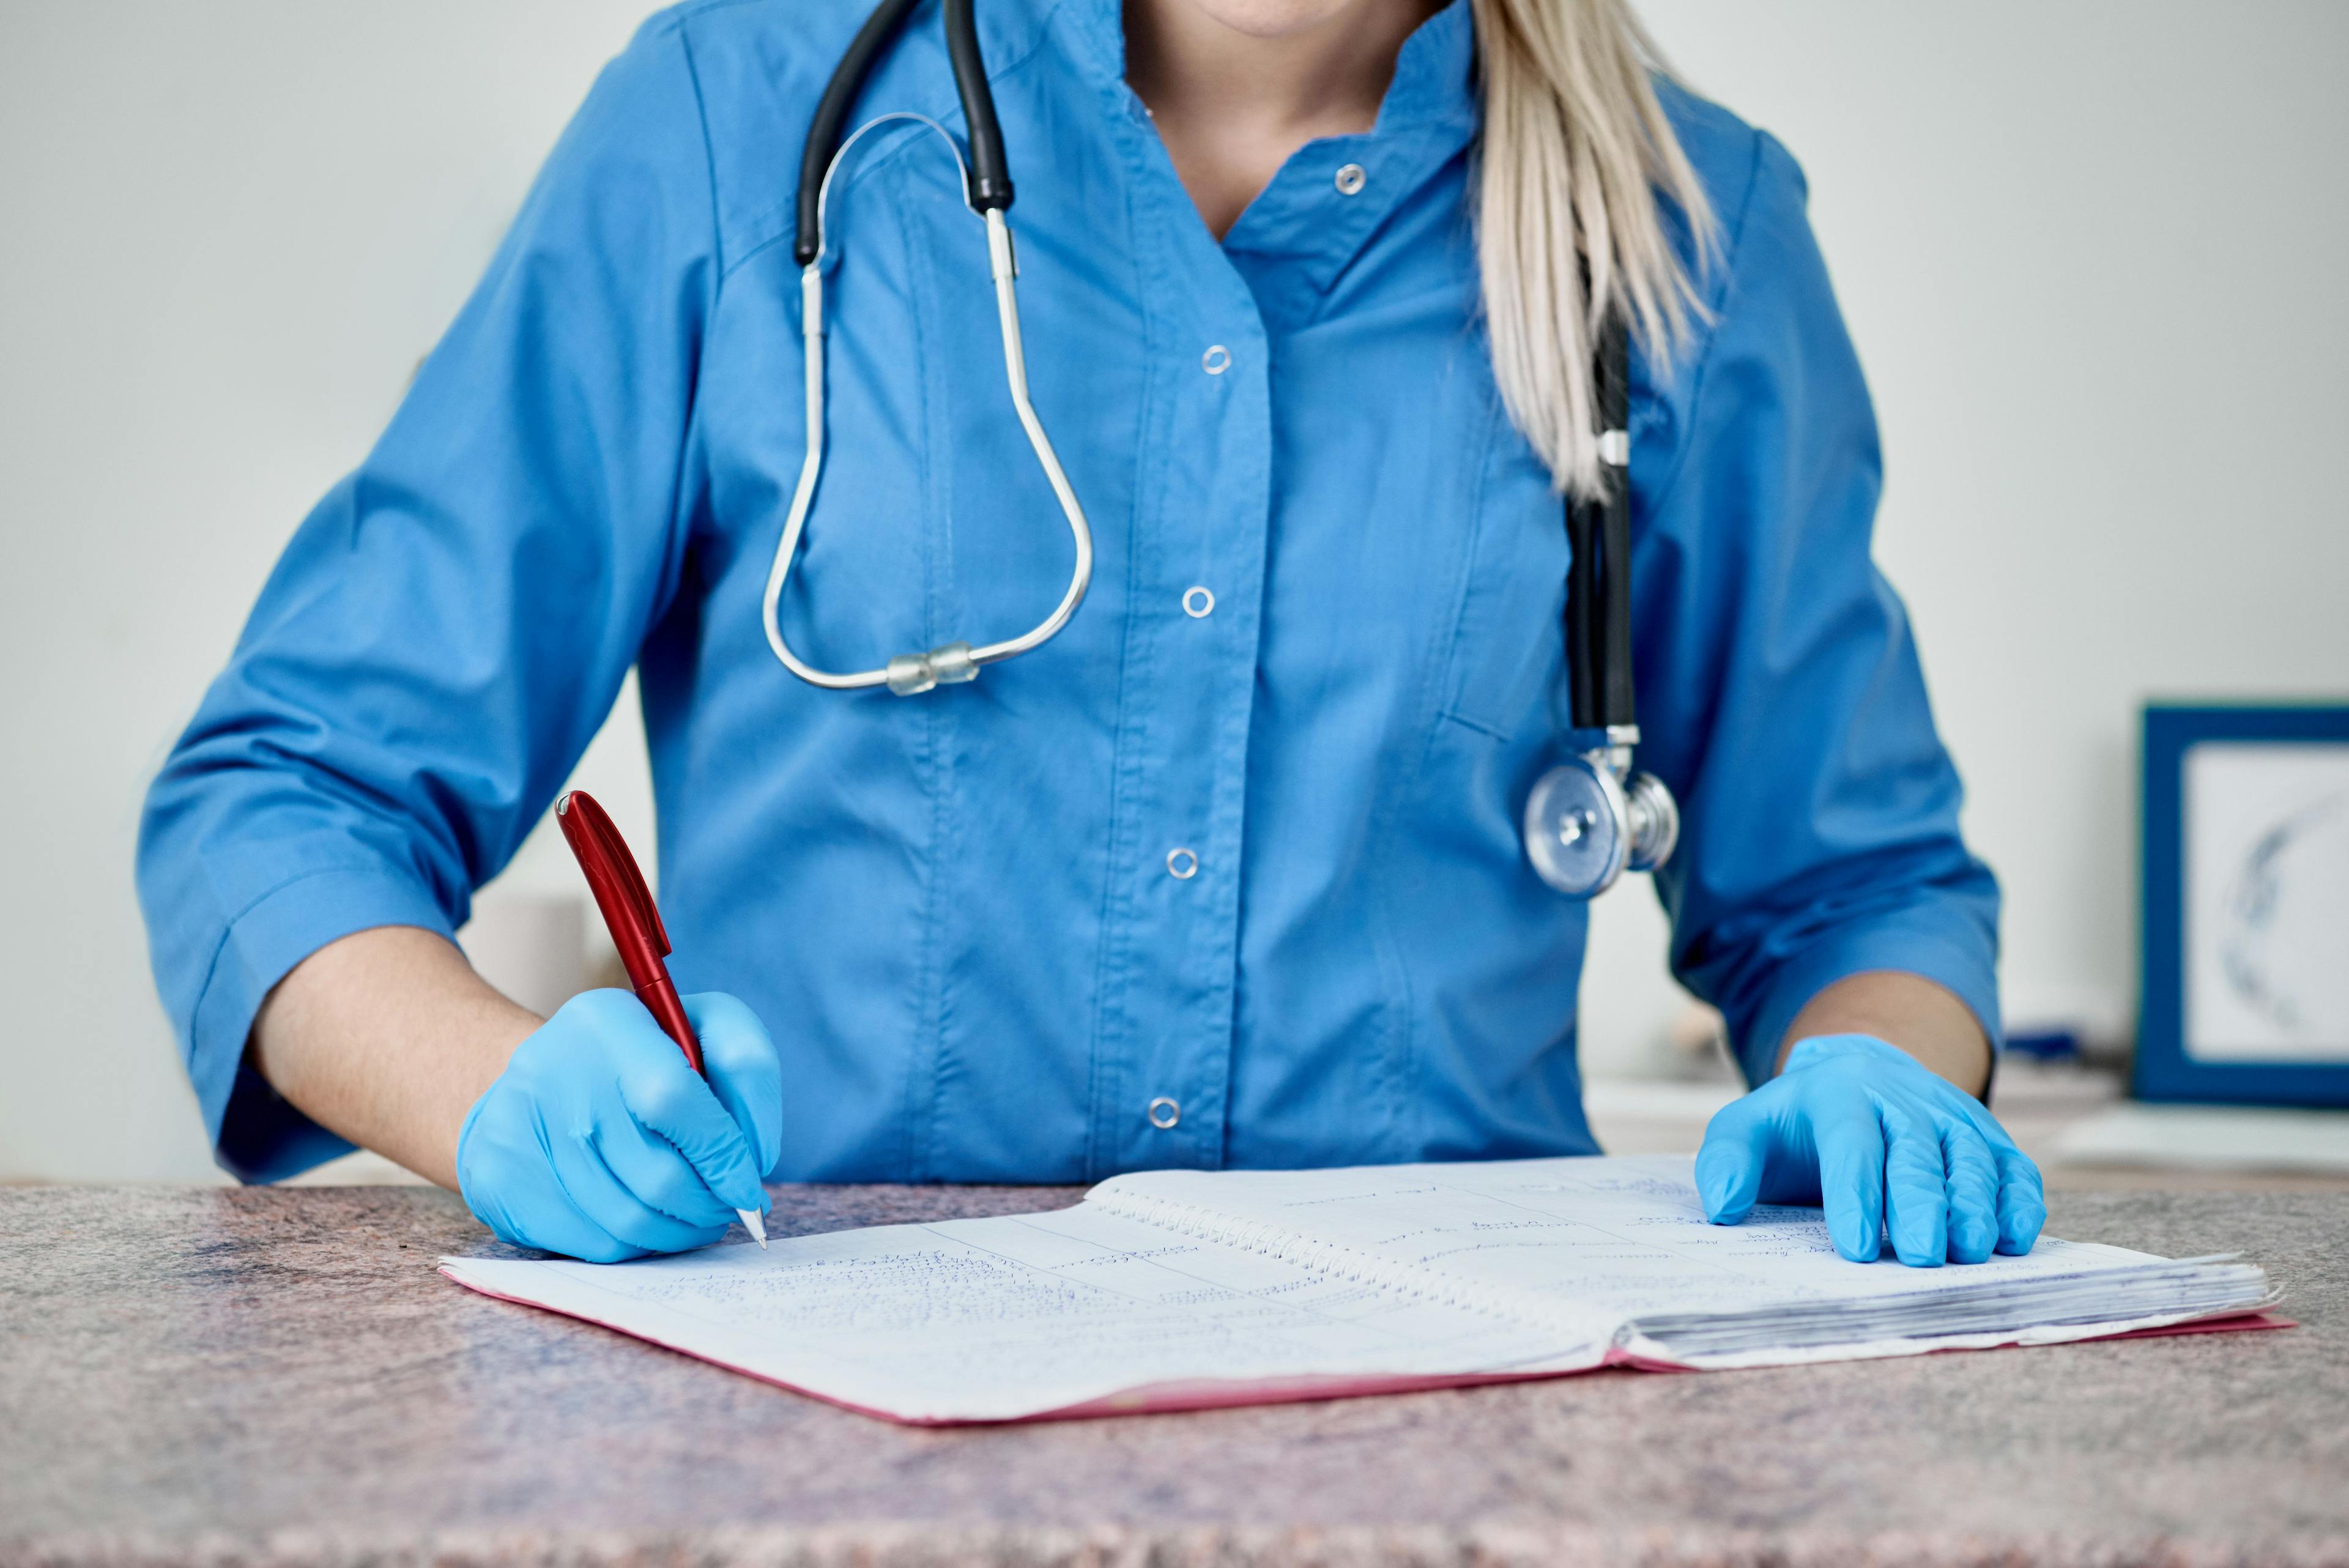 What at-will employment means for veterinarians